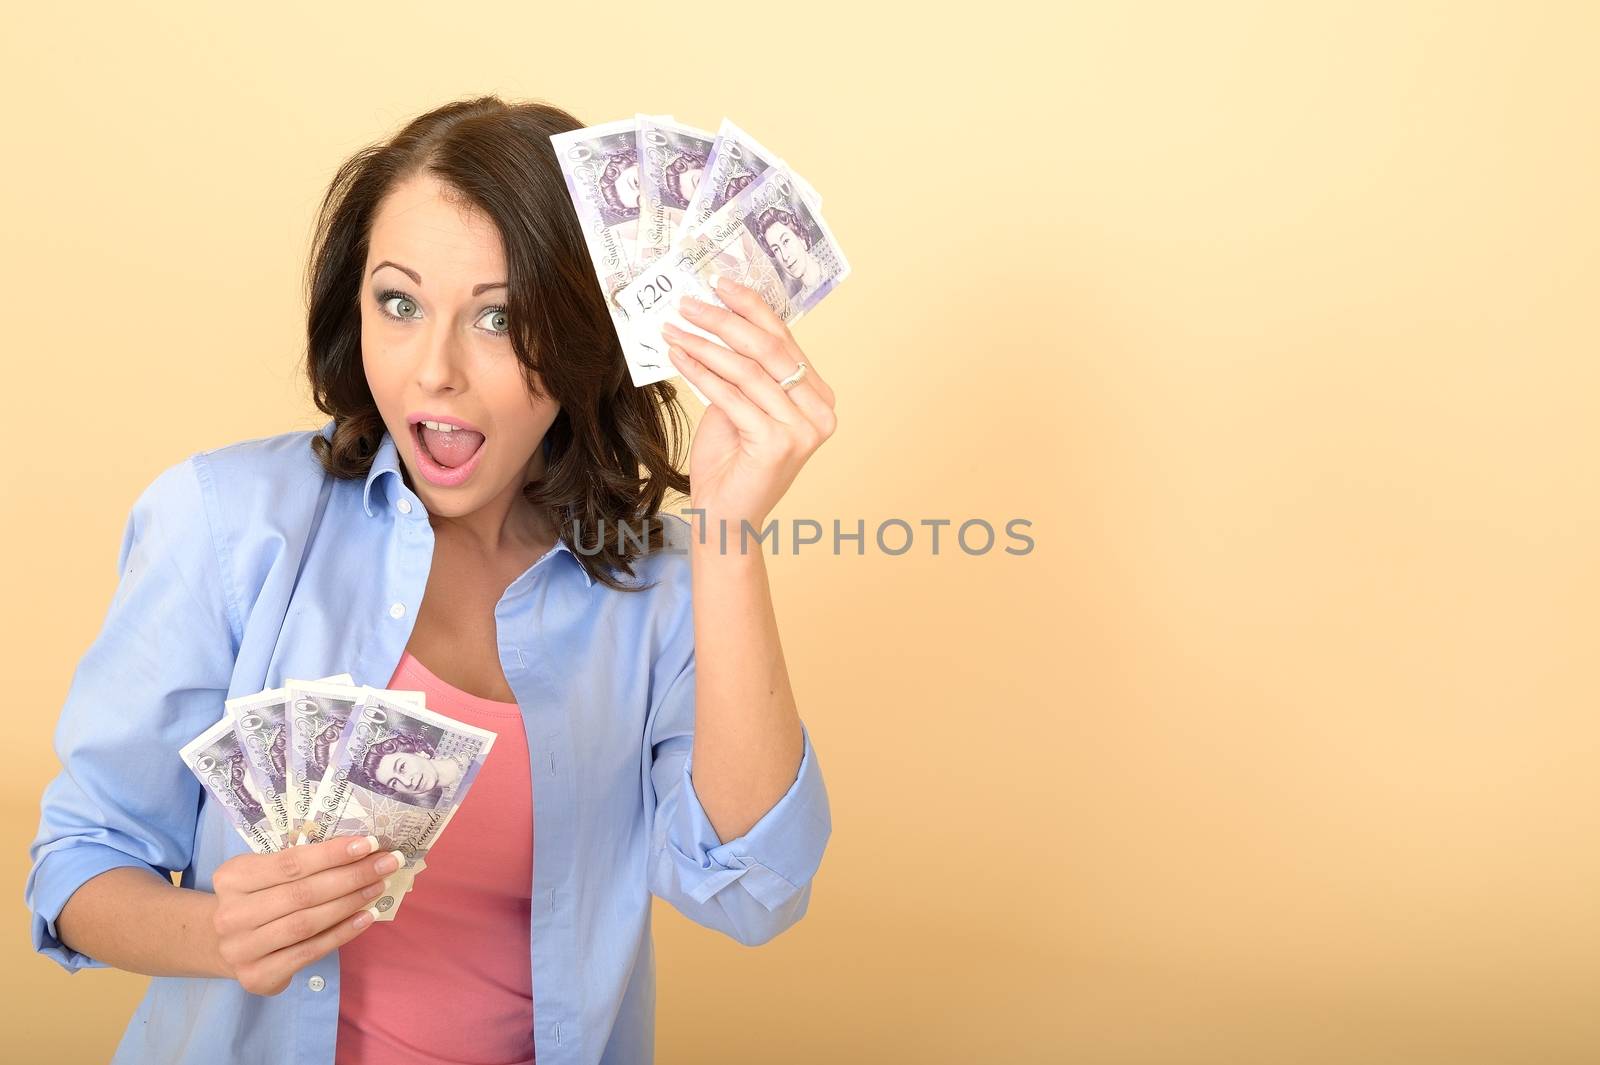 Young Happy Woman Holding Money Looking Pleased and Delighted by Whiteboxmedia